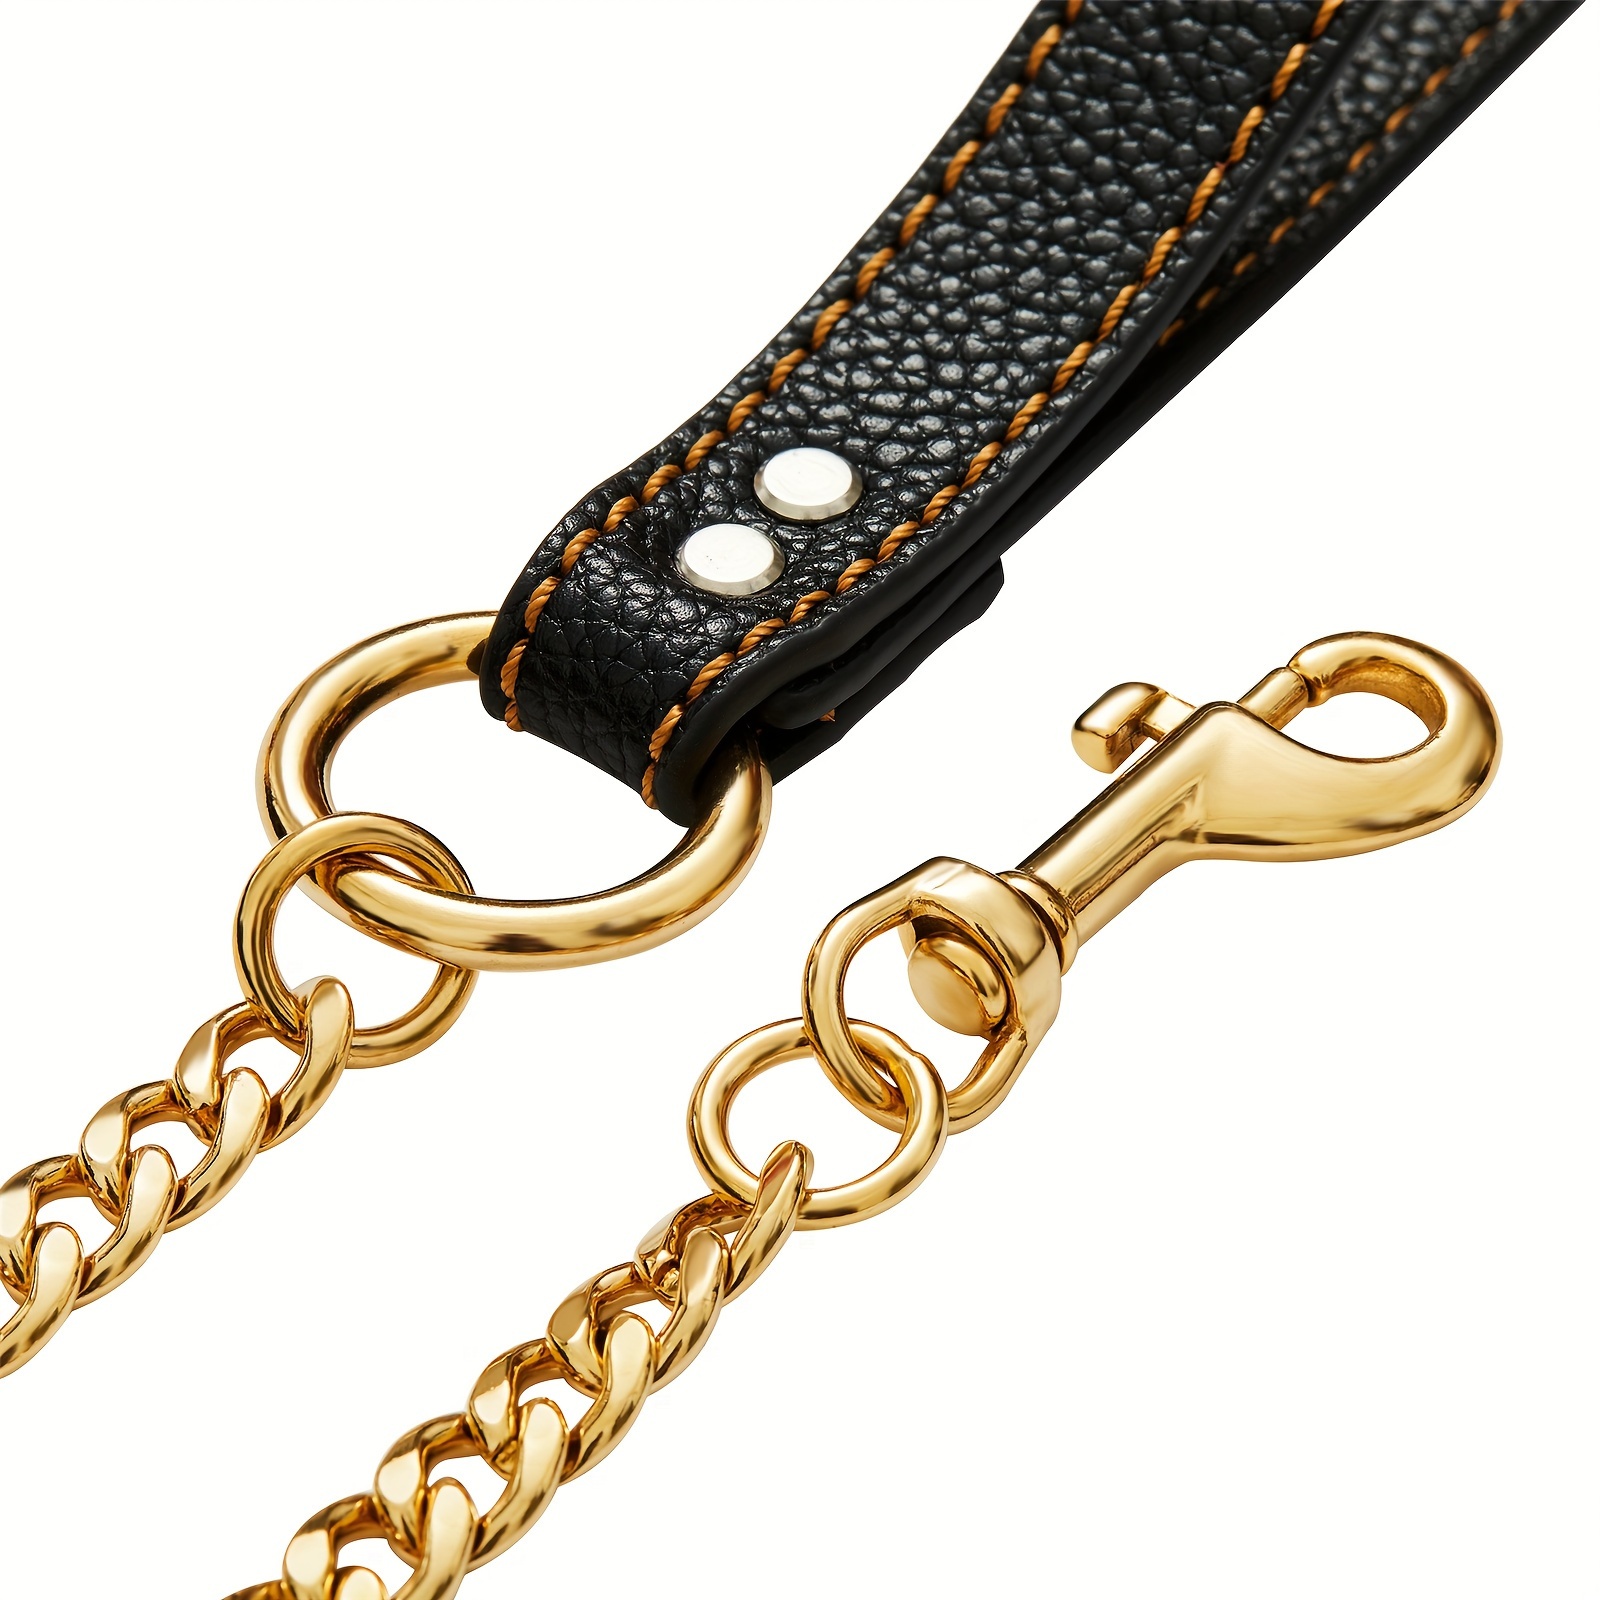 

Luxury Dog Leash, Stainless Steel Chain With Black Leather Handle, 50 Inches Length, 0.47 Inches Width, Durable Pet Traction Rope For Walking